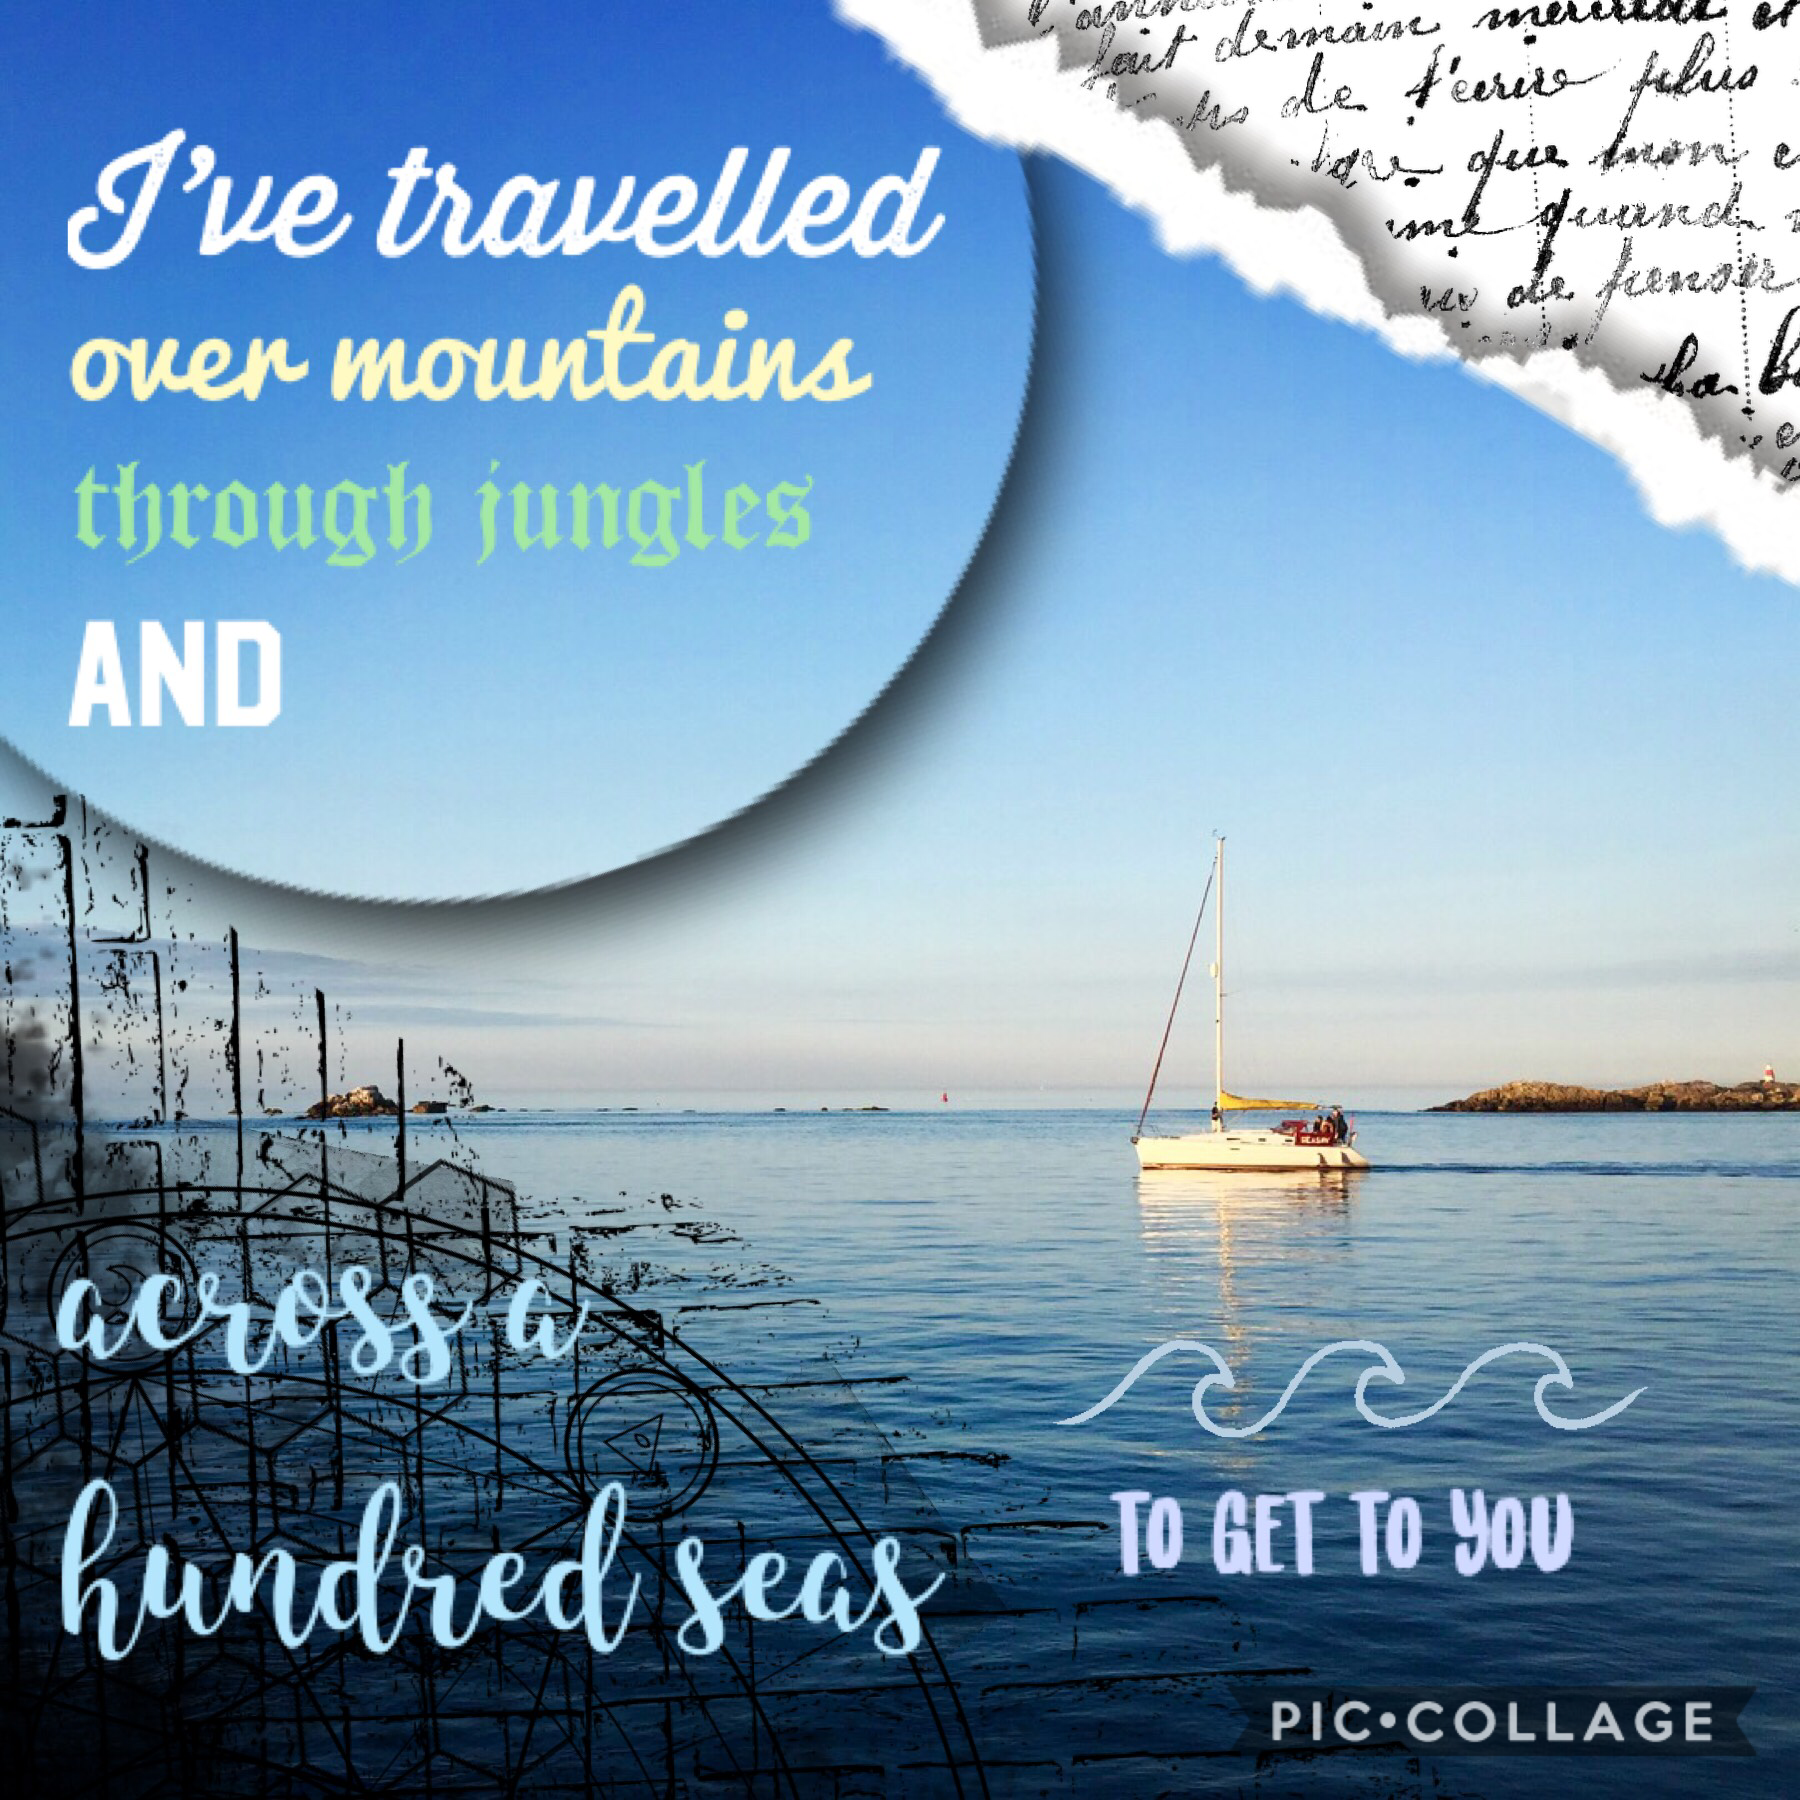 🌊⛵️💕
This quote I thought of is ehh not very good but it’ll do :) my picture from France 